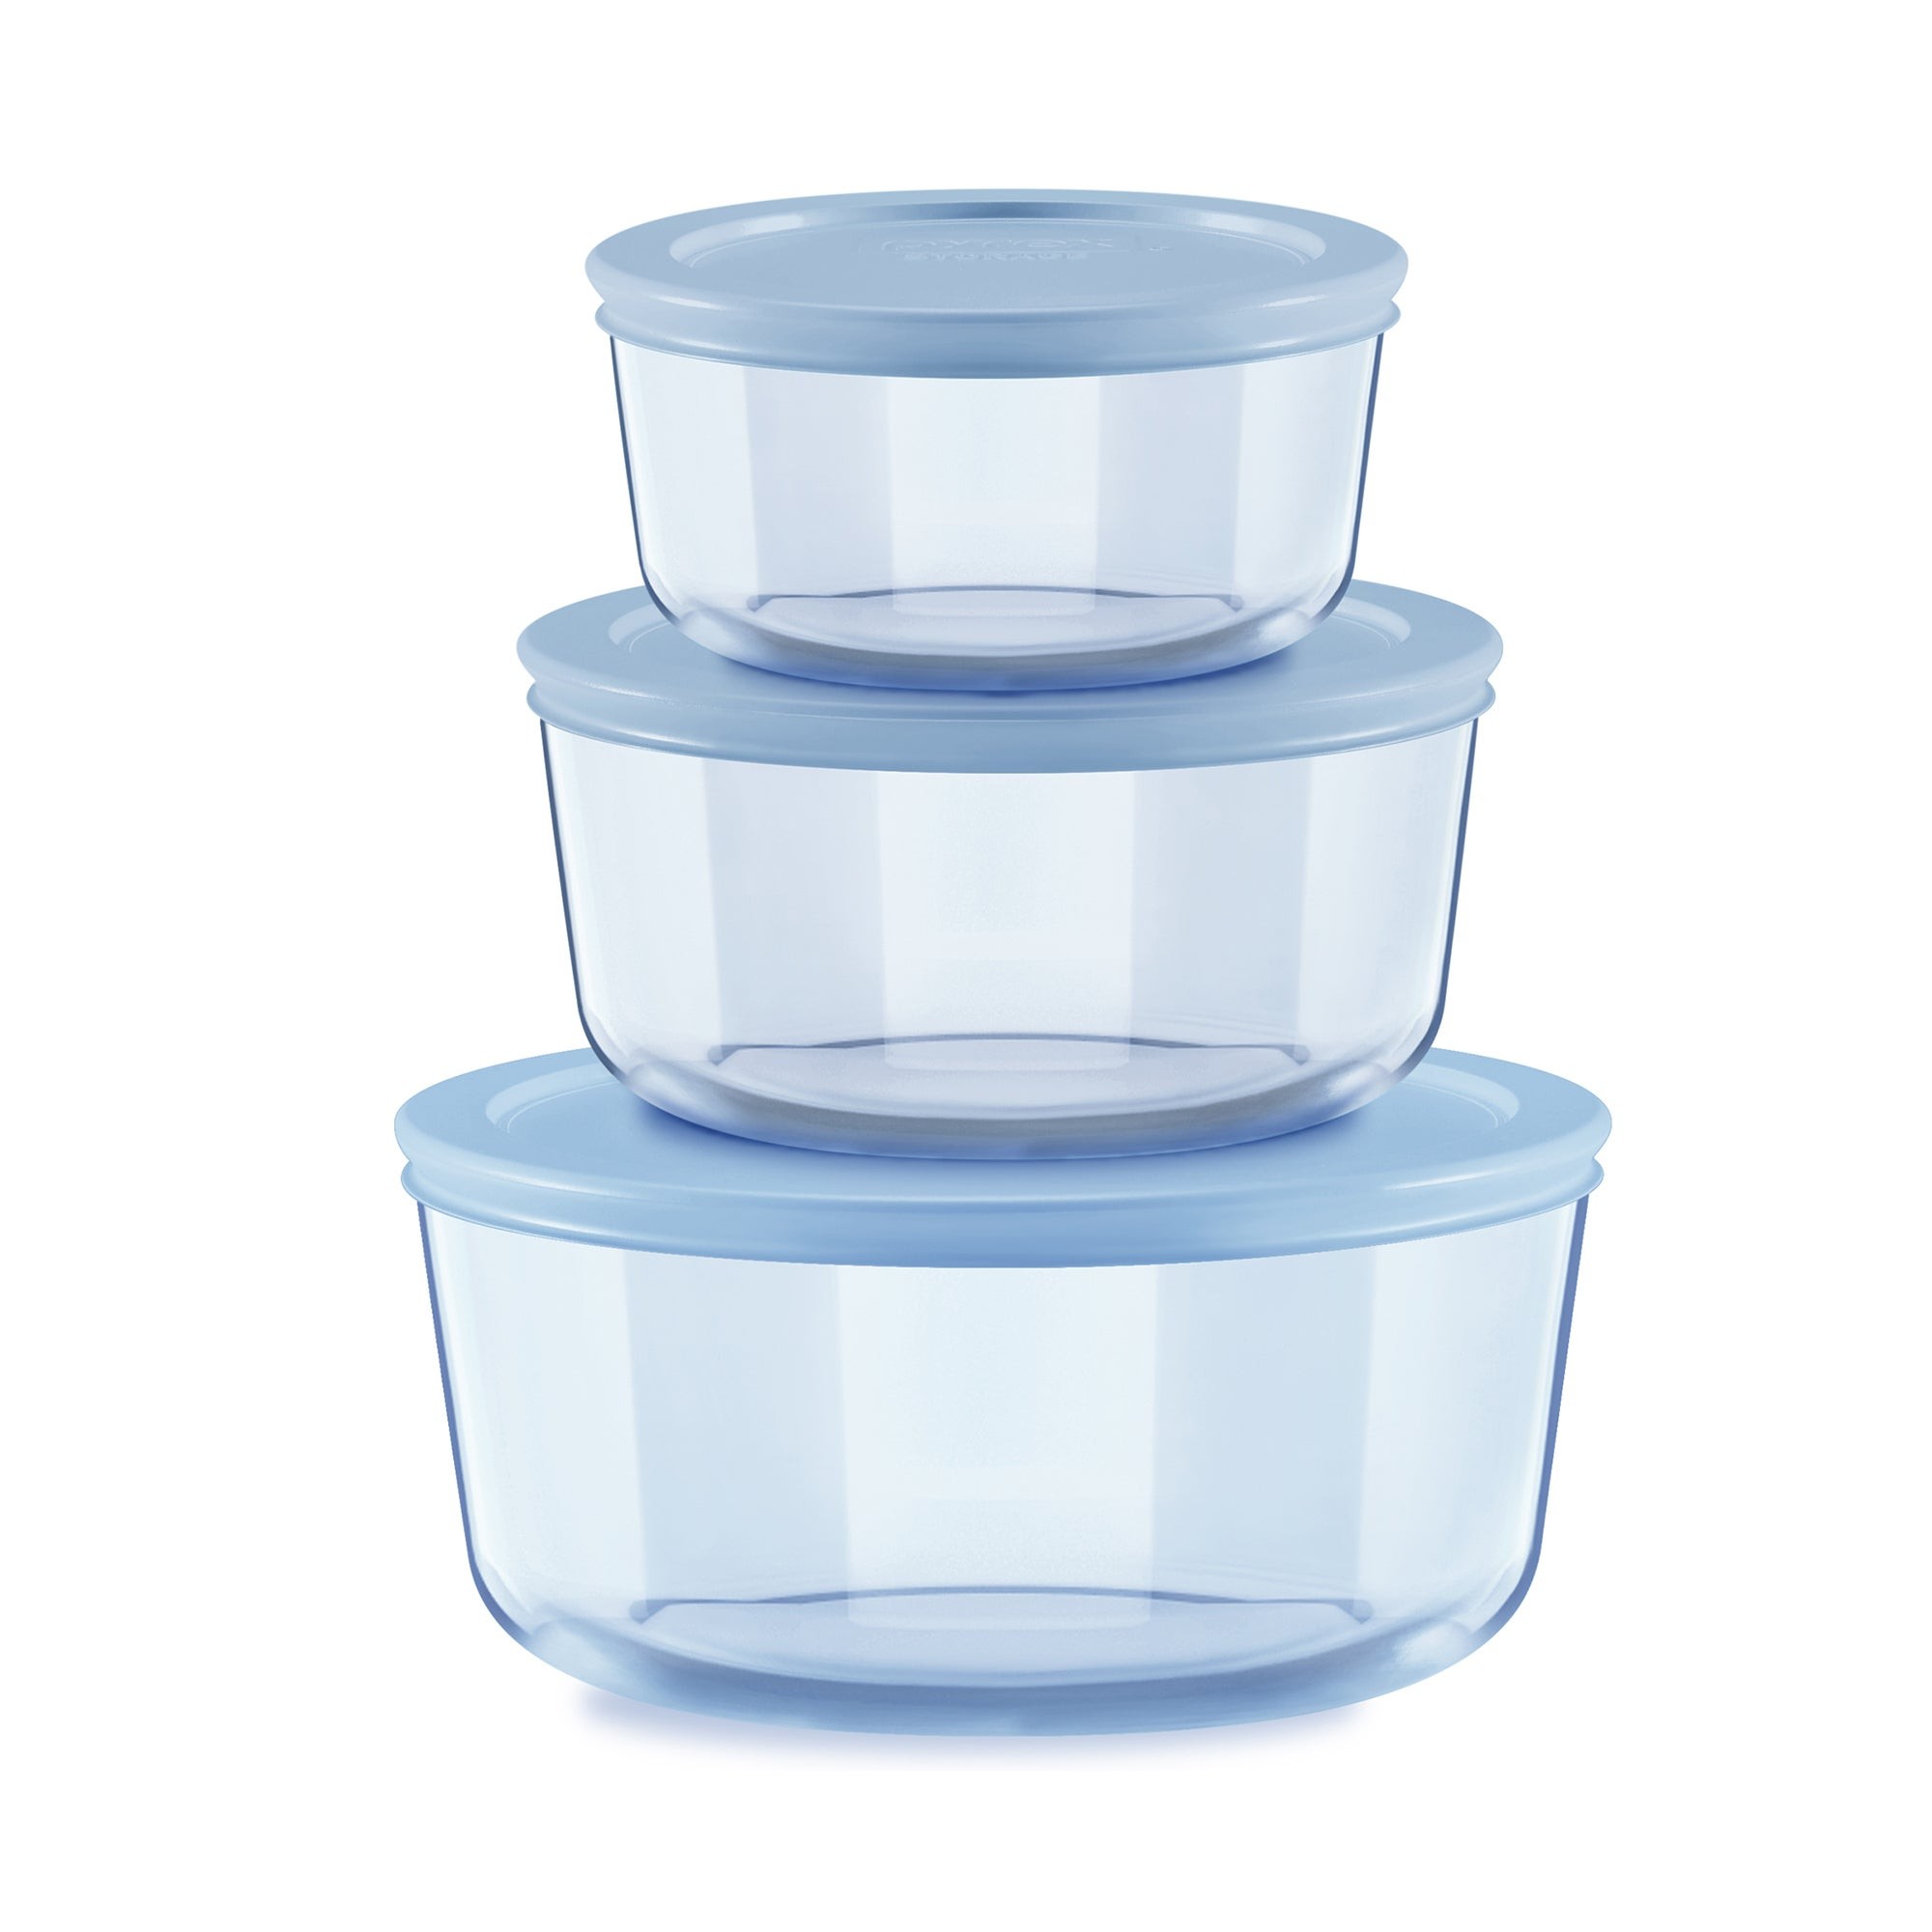 6pc Simply Store Round Tinted Glass Food Storage Set Blue Lids